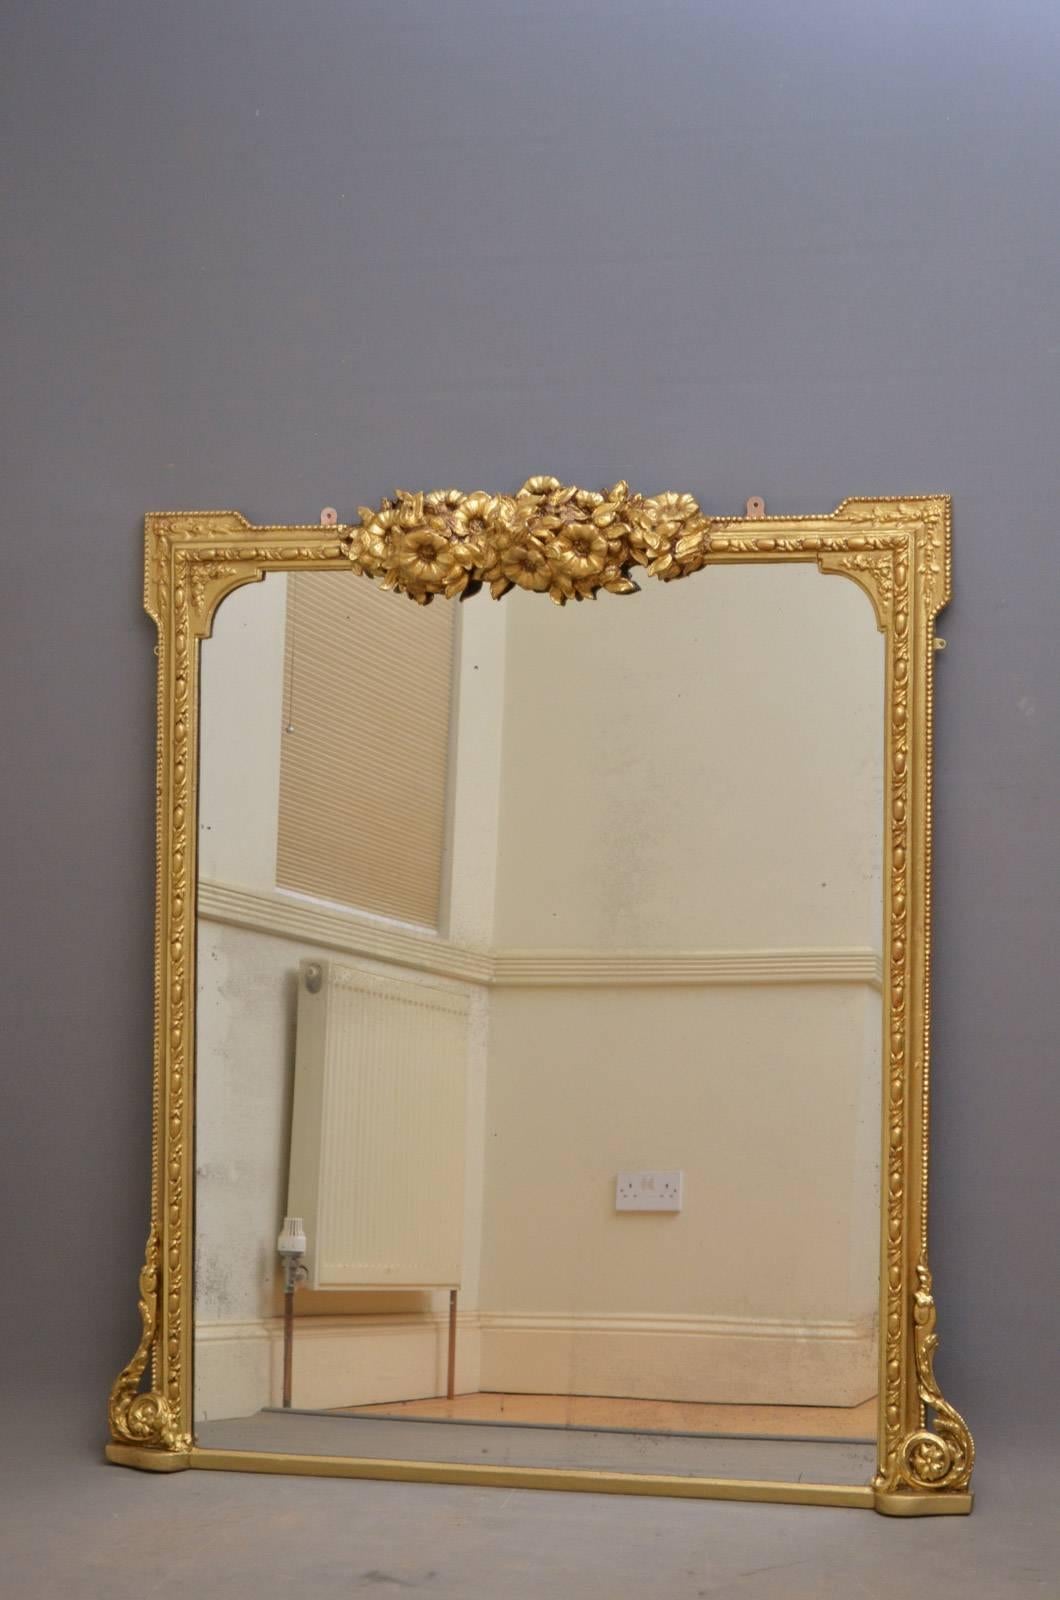 K0288, Victorian gilt overmantel mirror, having flower decoration to centre and original mirror plate with foxing in carved frame. This antique mirror has been refinished and is ready to place at home, circa 1870.
Measures: H 54.5